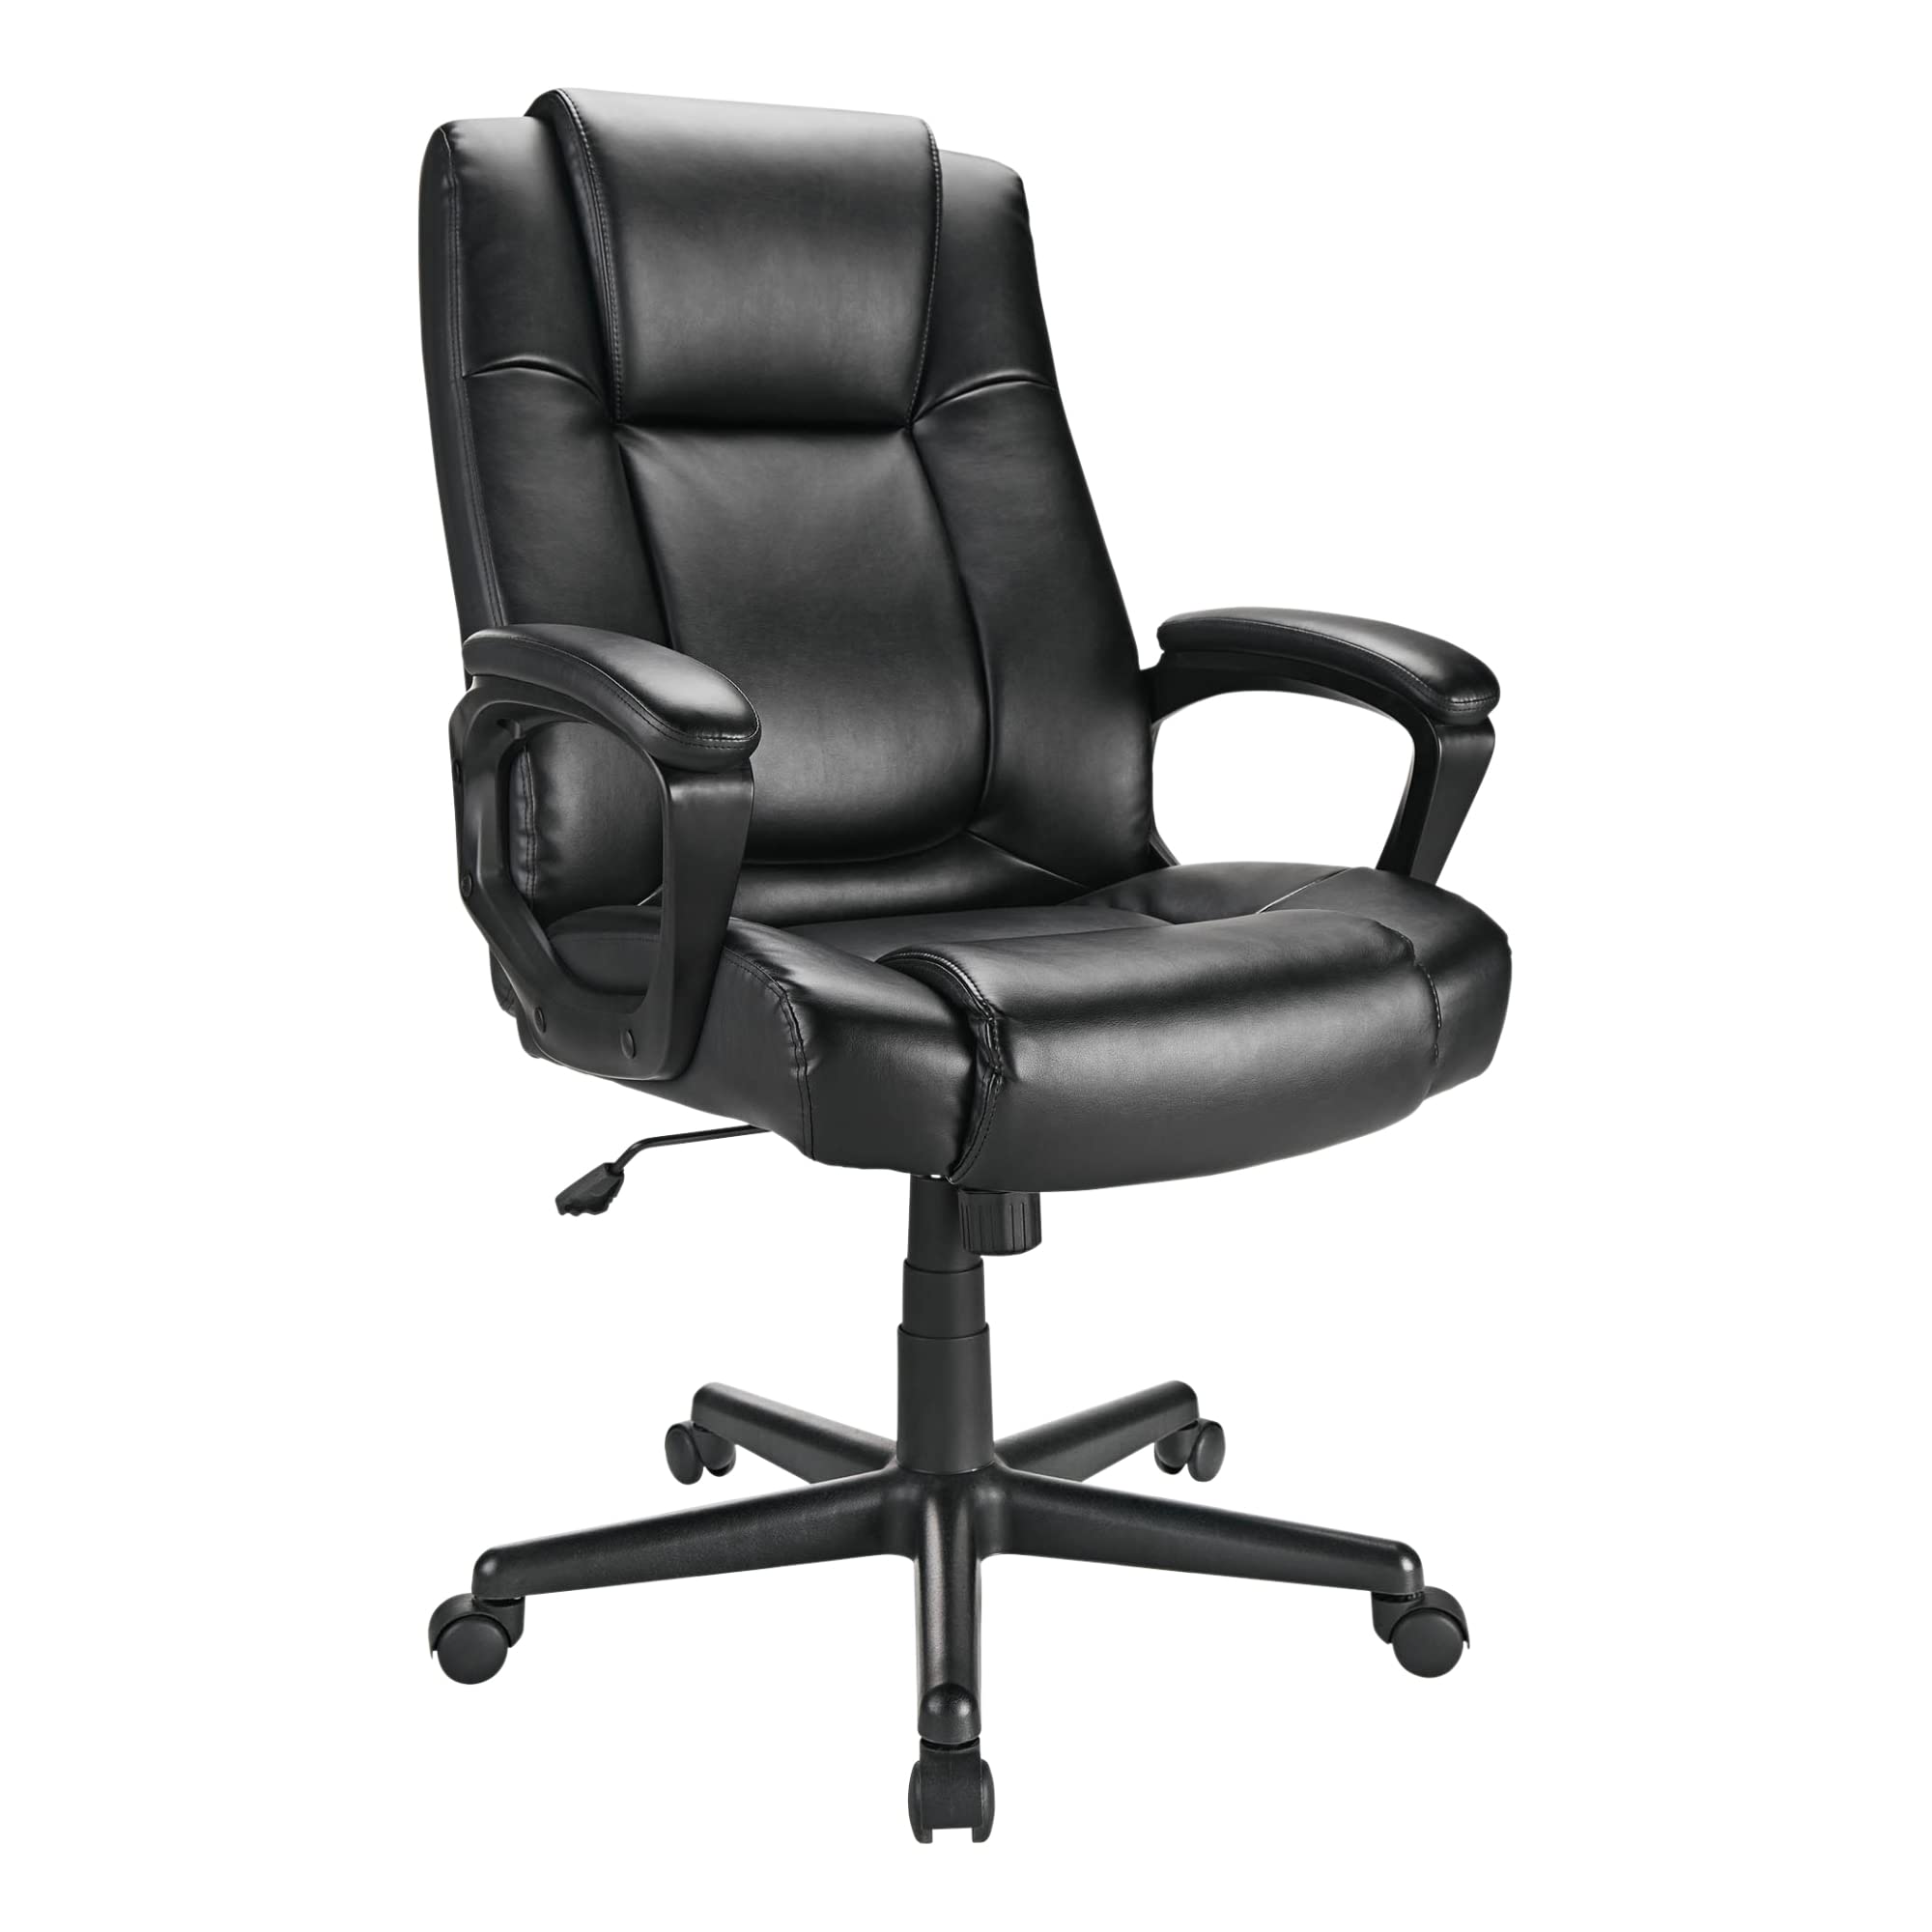 Realspace ® Hurston Bonded Leather High-Back Executive Chair, Black